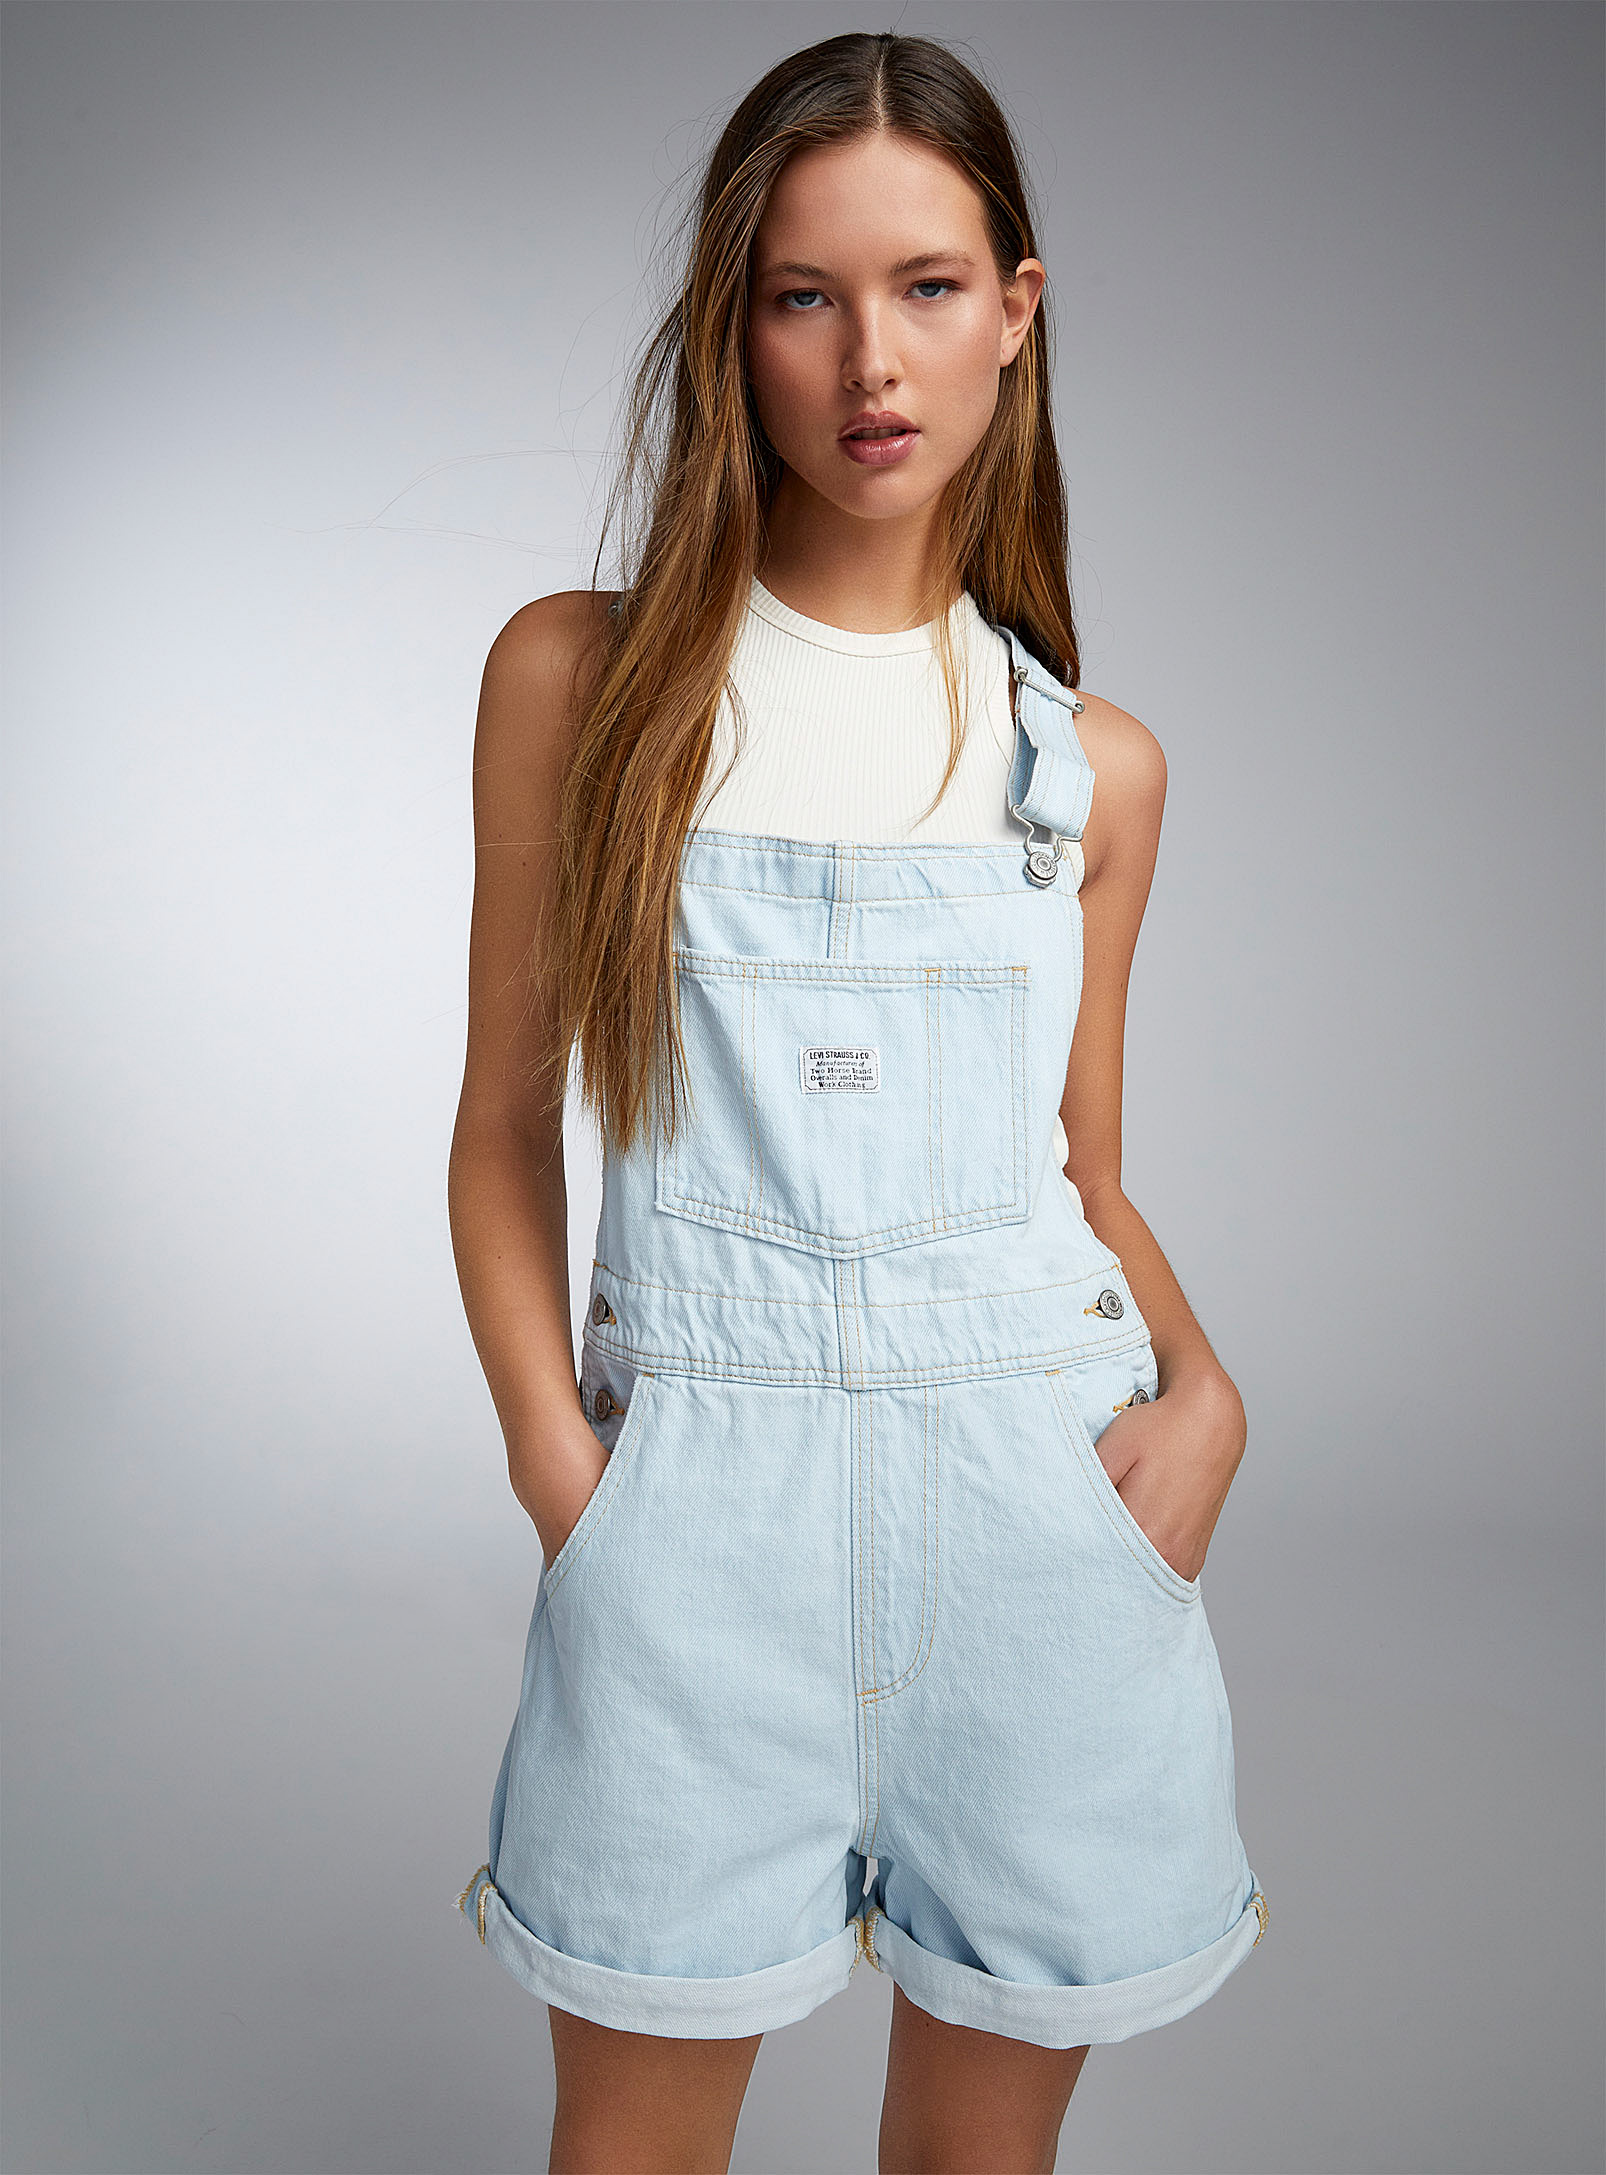 Levi's Vintage Light Blue Denim Overall-shorts In Baby Blue